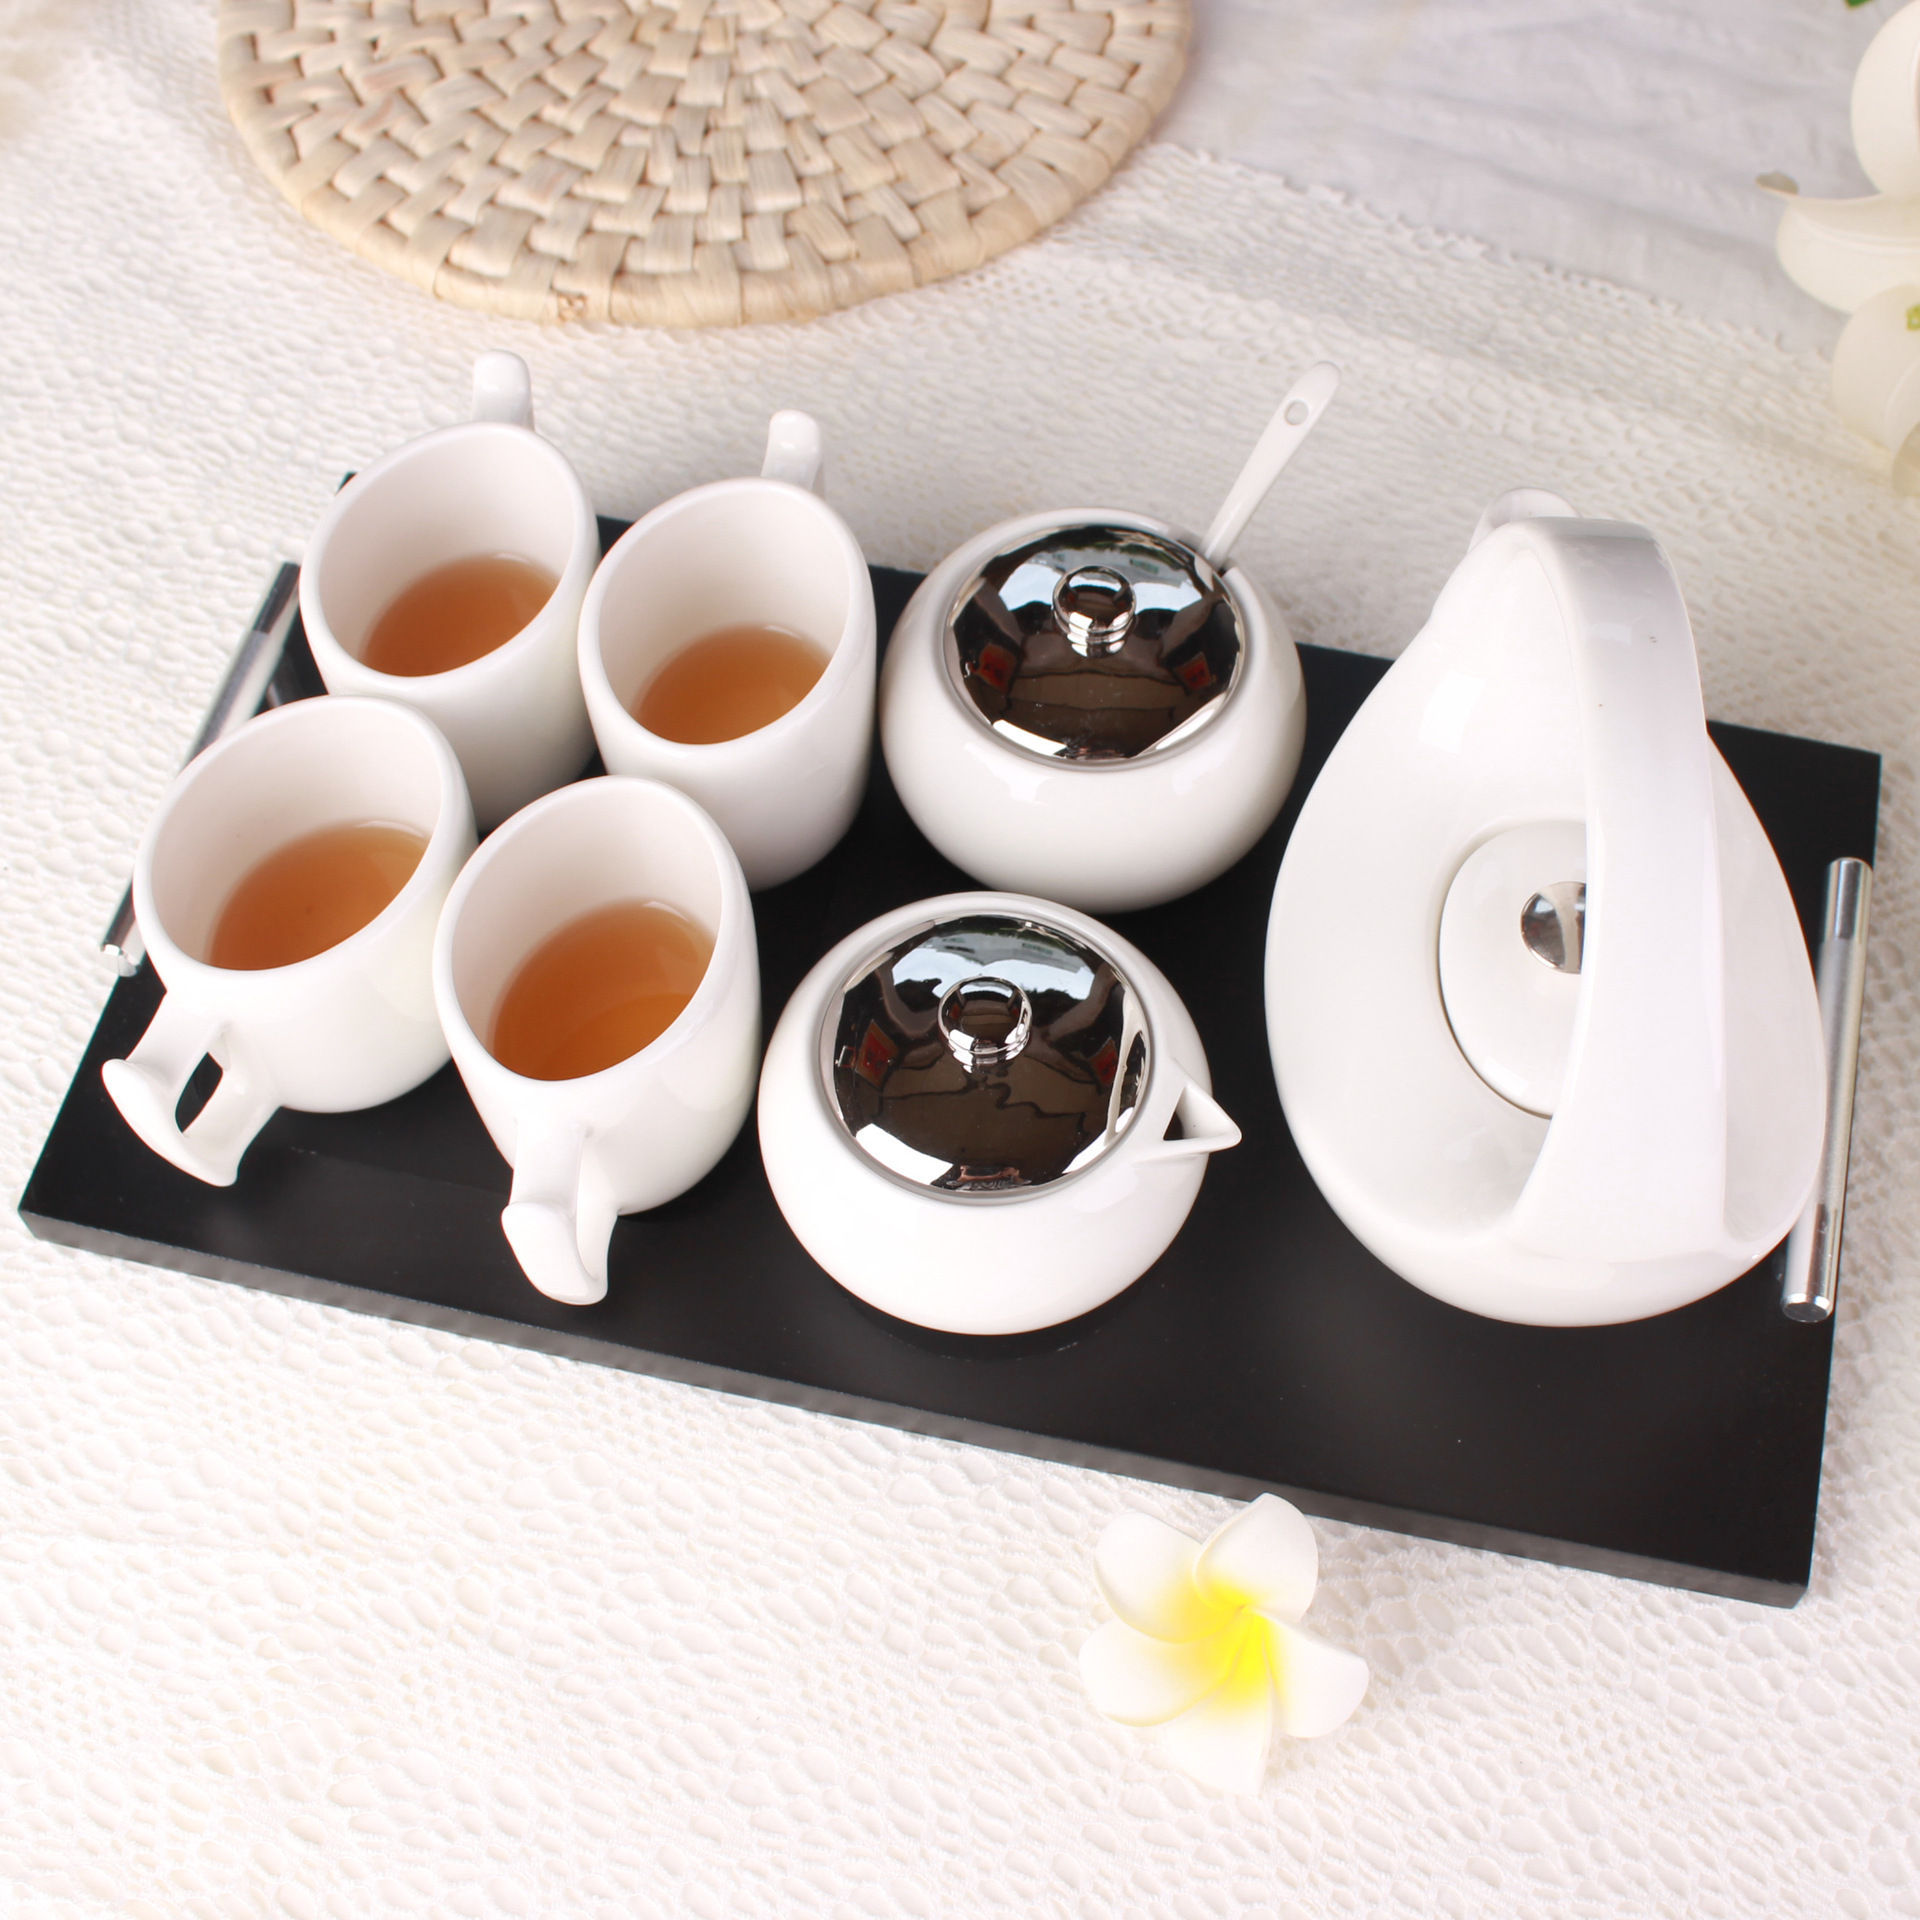 Ceramic Coffee Cup Set Stainless Steel Filter Business Gifts Exquisite Tea Cups Teapot With Wood Tray